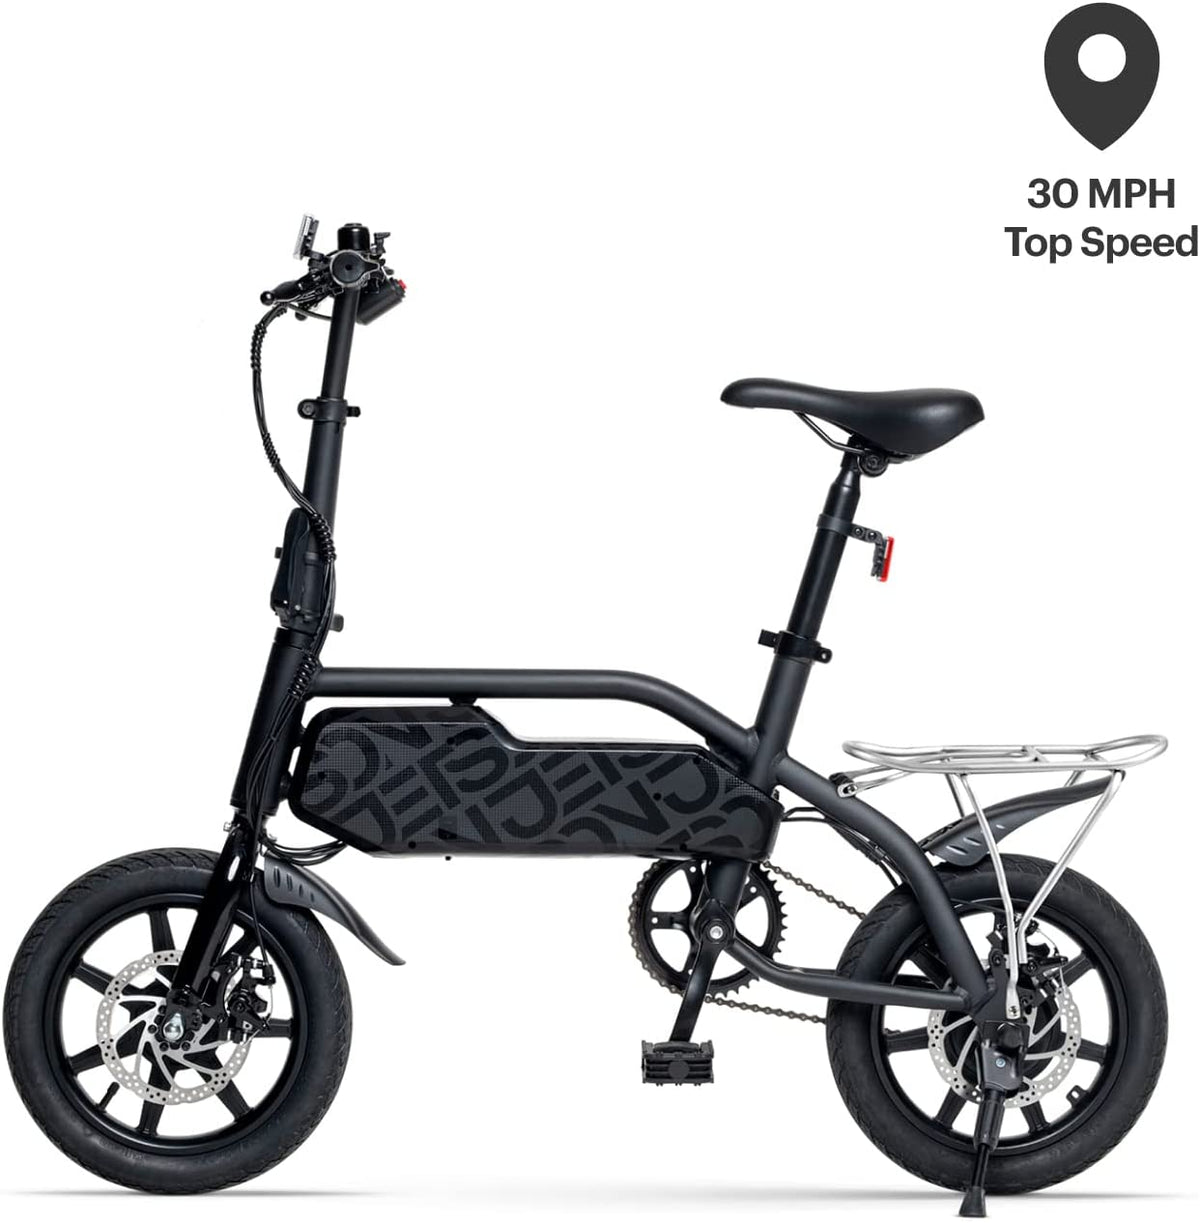 Jetson J5 Up To 30 Mile Range 15 MPH 14" Tires 350W Foldable Electric Bike New